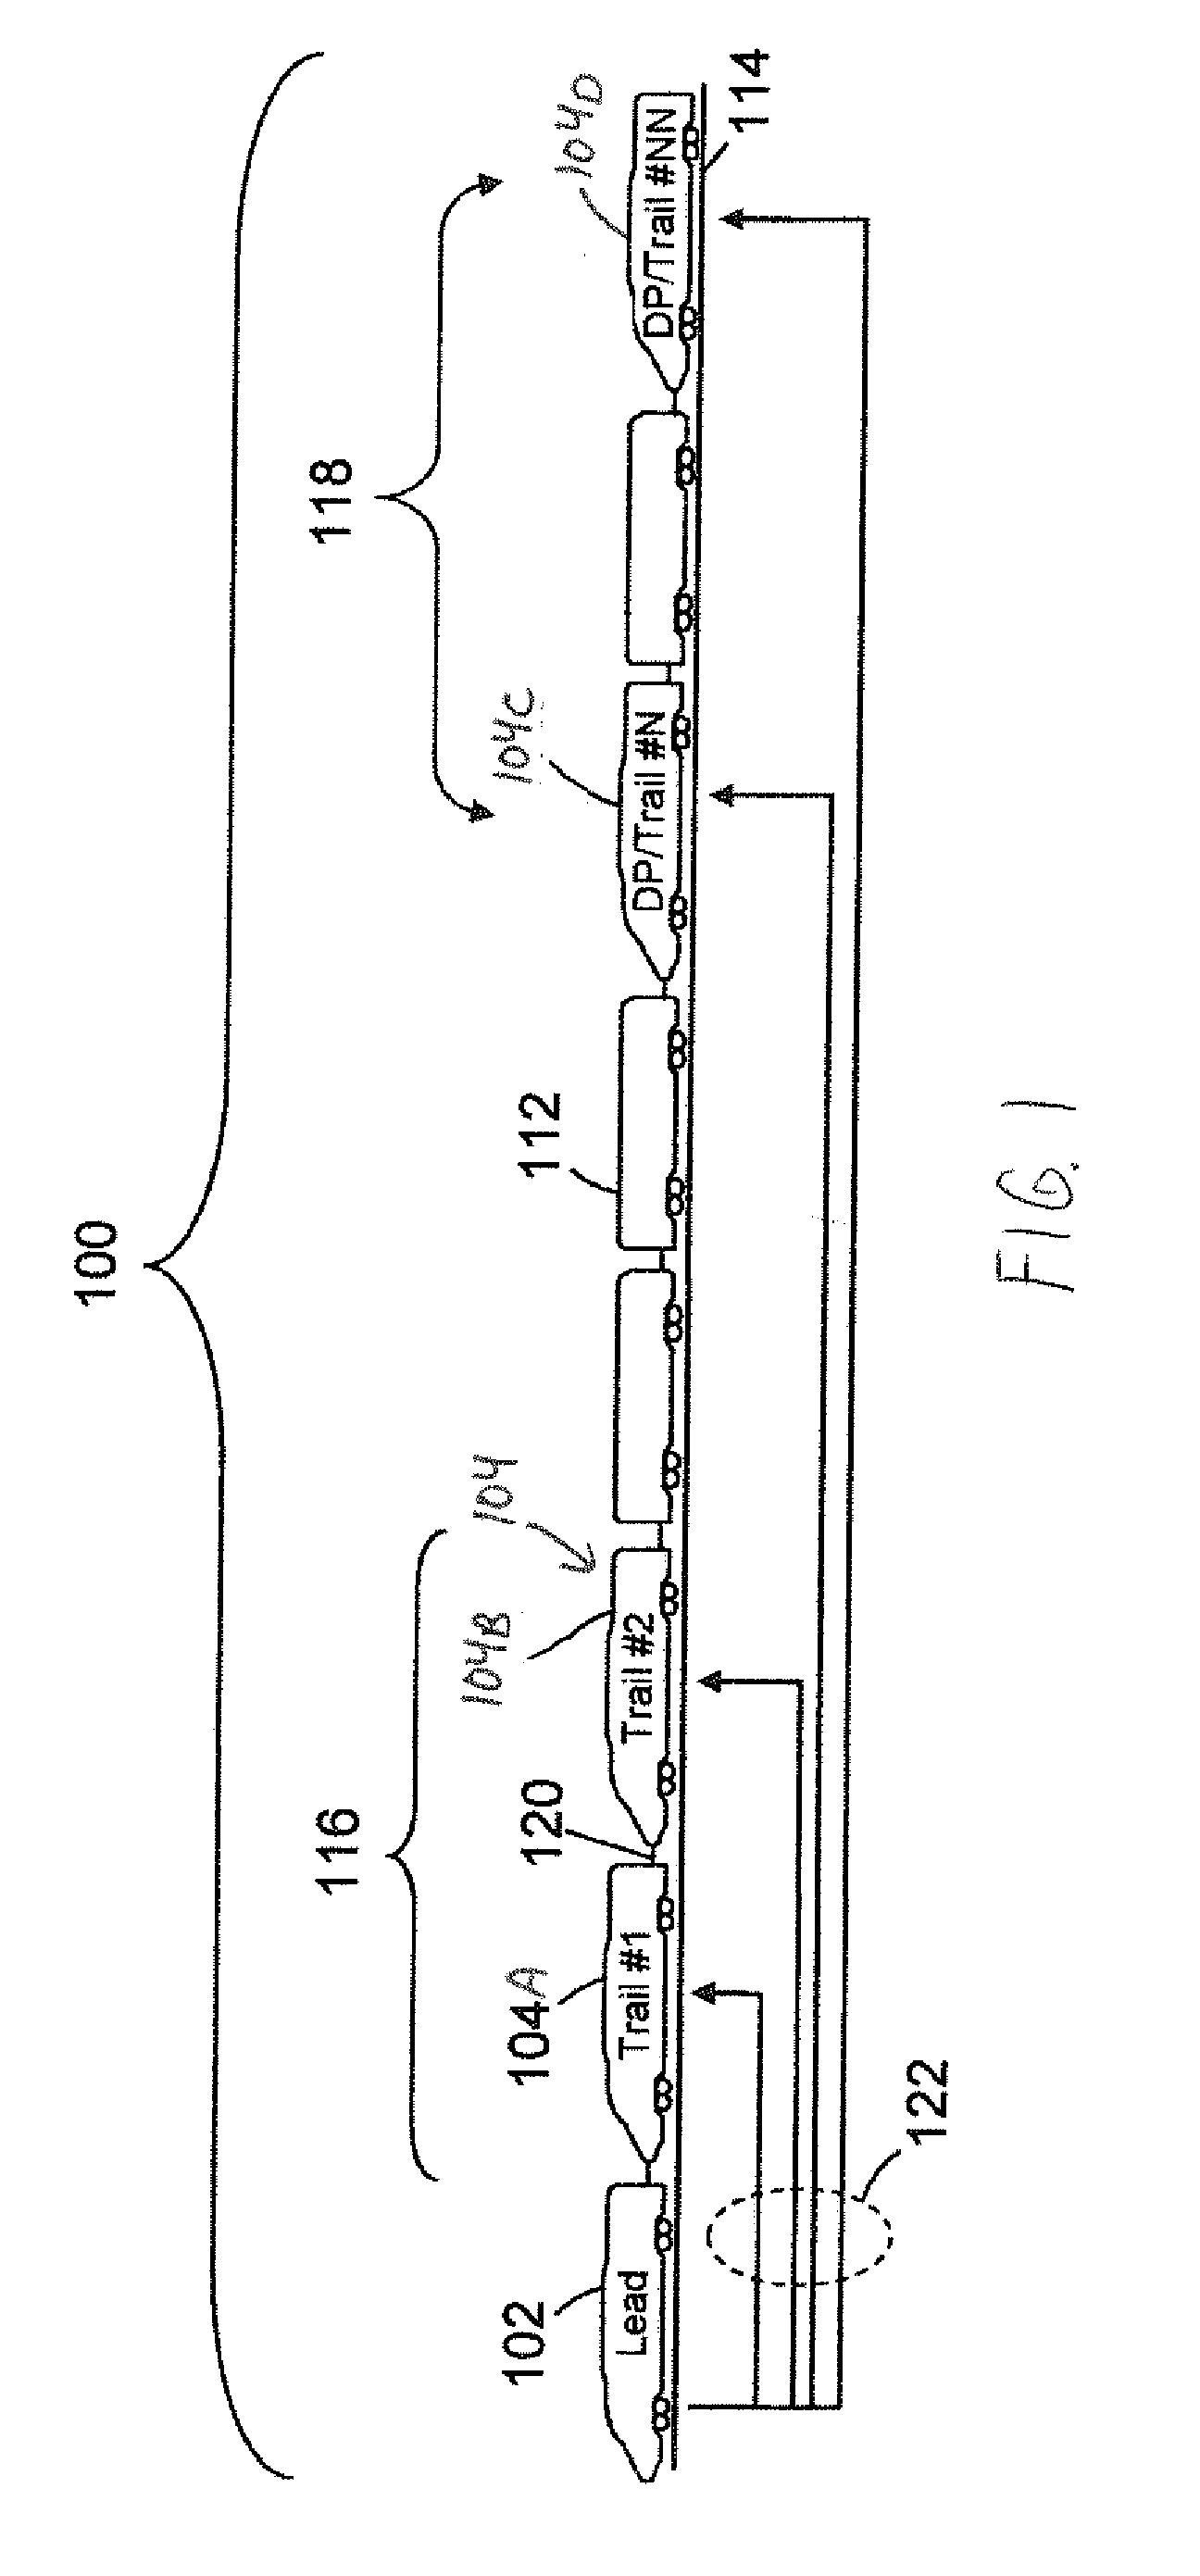 Control system and method for remotely isolating powered units in a vehicle system